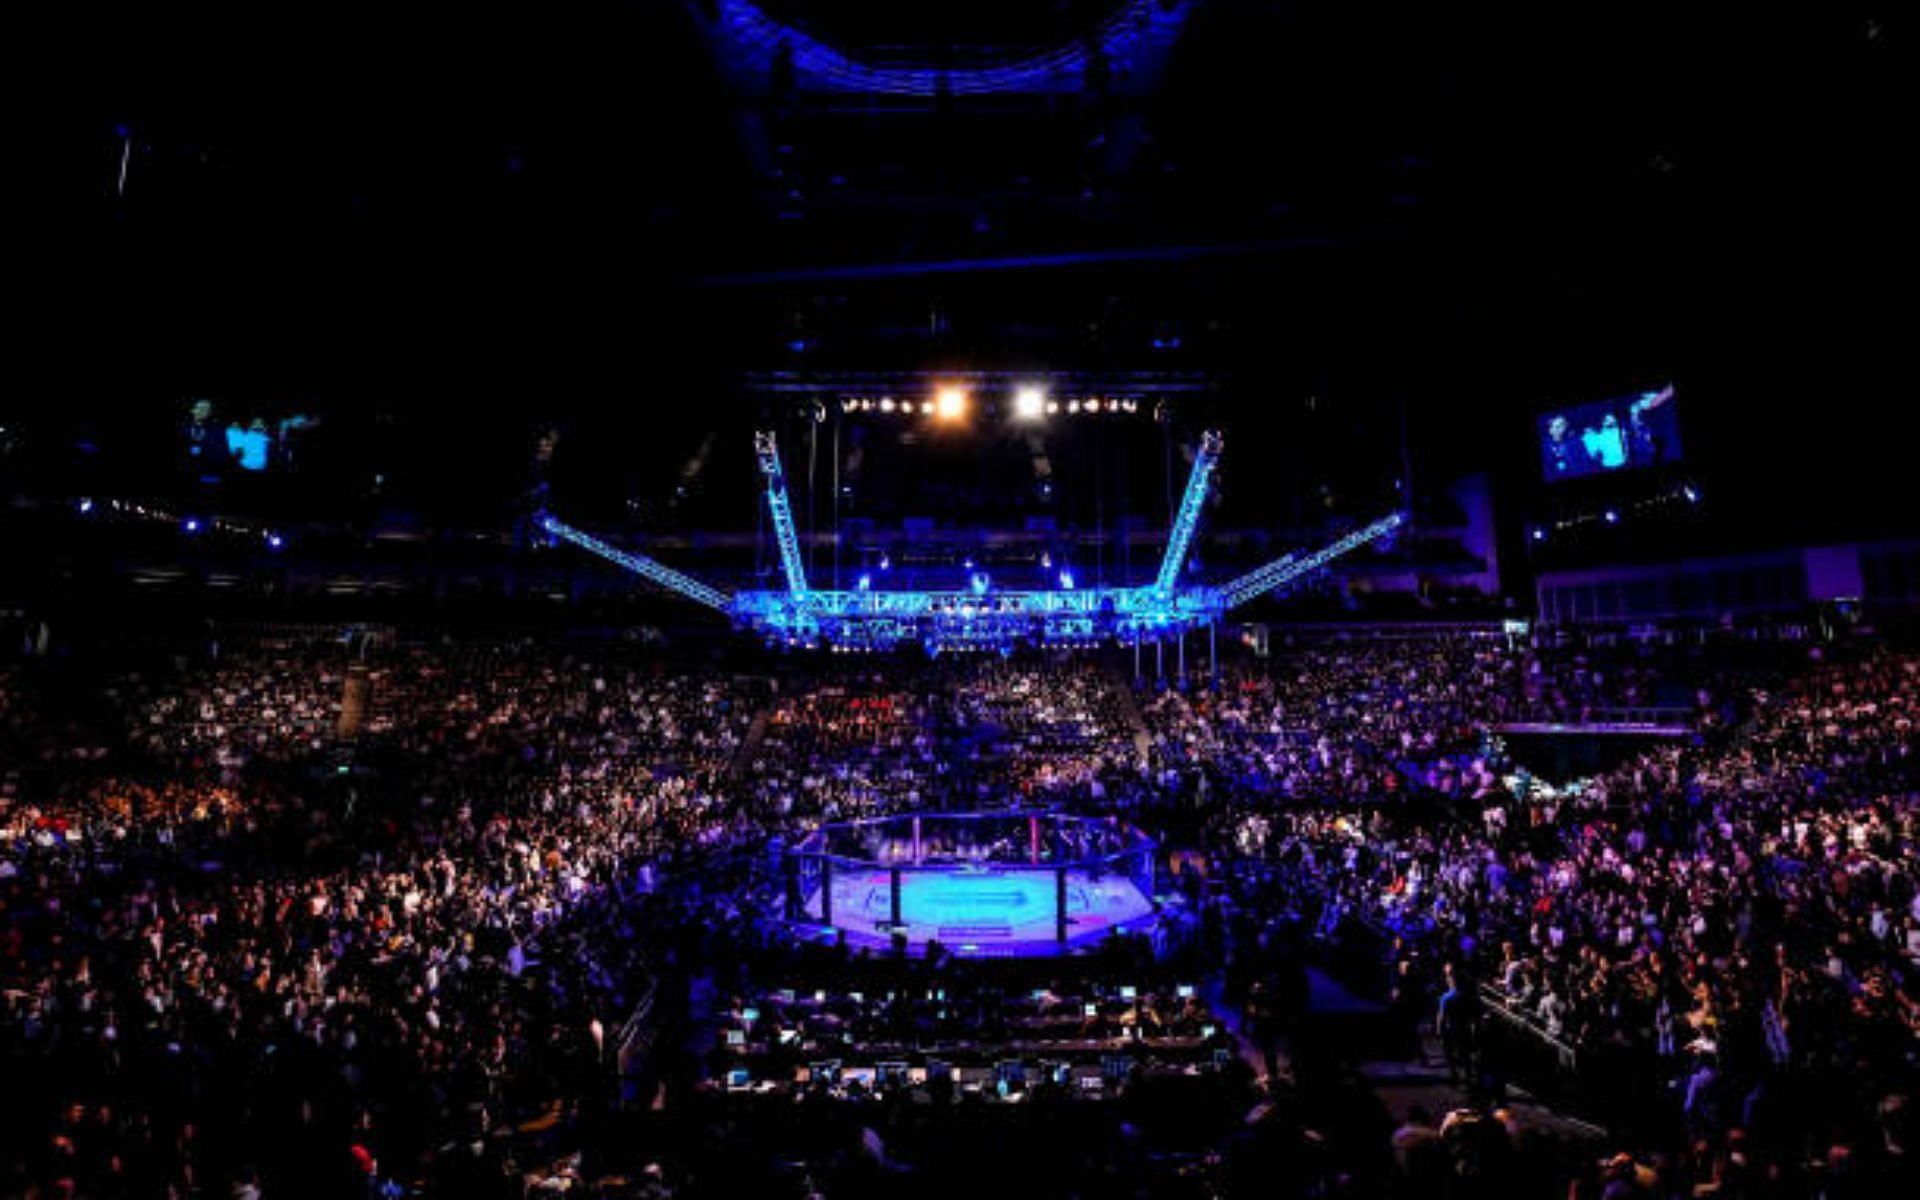 UFC London at the O2 Arena in March 2022 [Image Courtesy: @GettyImages]